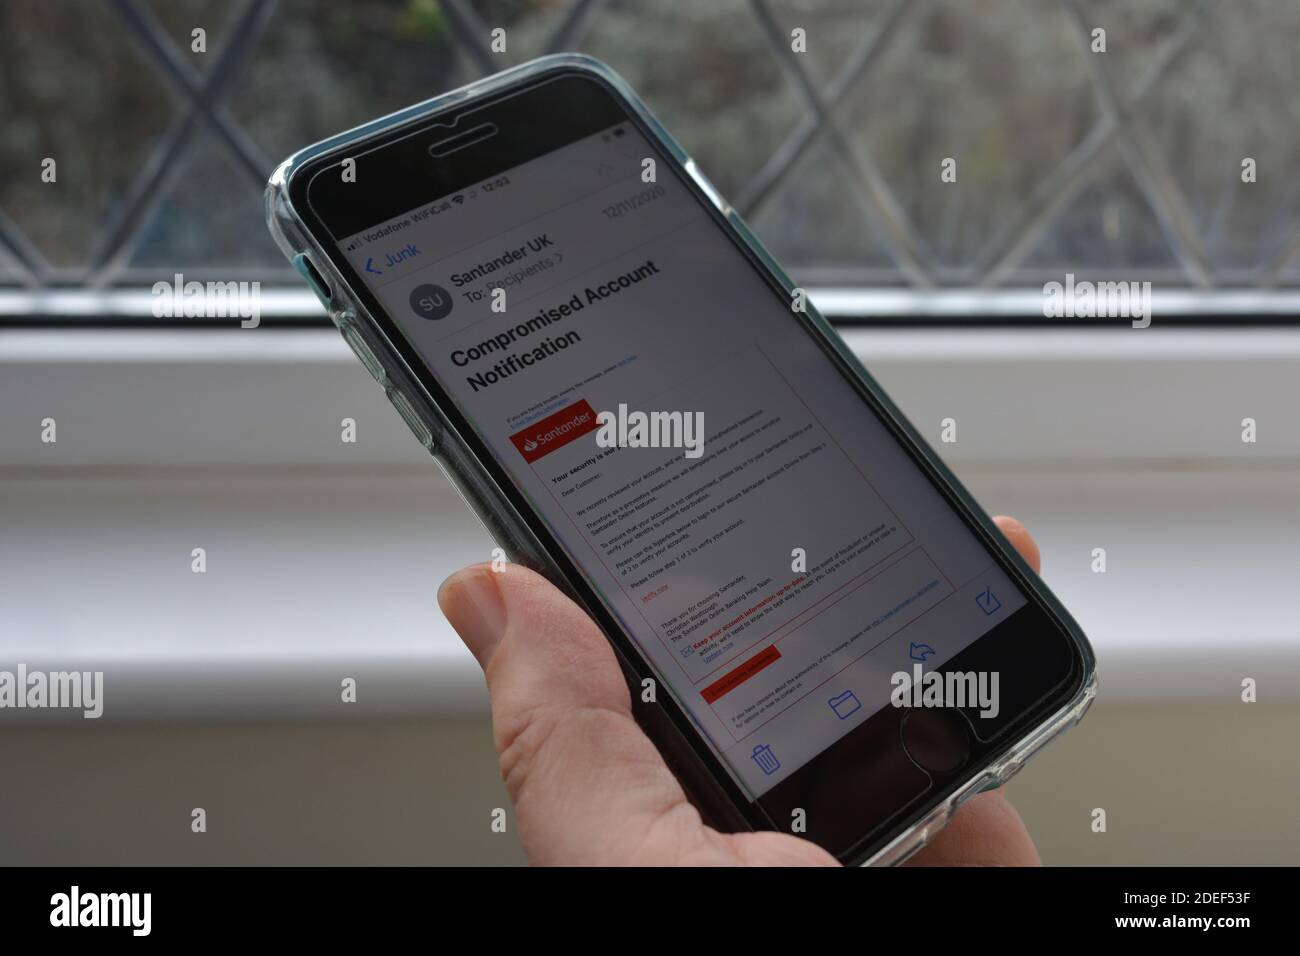 Mobile phone in woman's hand with a scam / phishing email, purporting to be from the Santander bank,  displayed on the screen Stock Photo